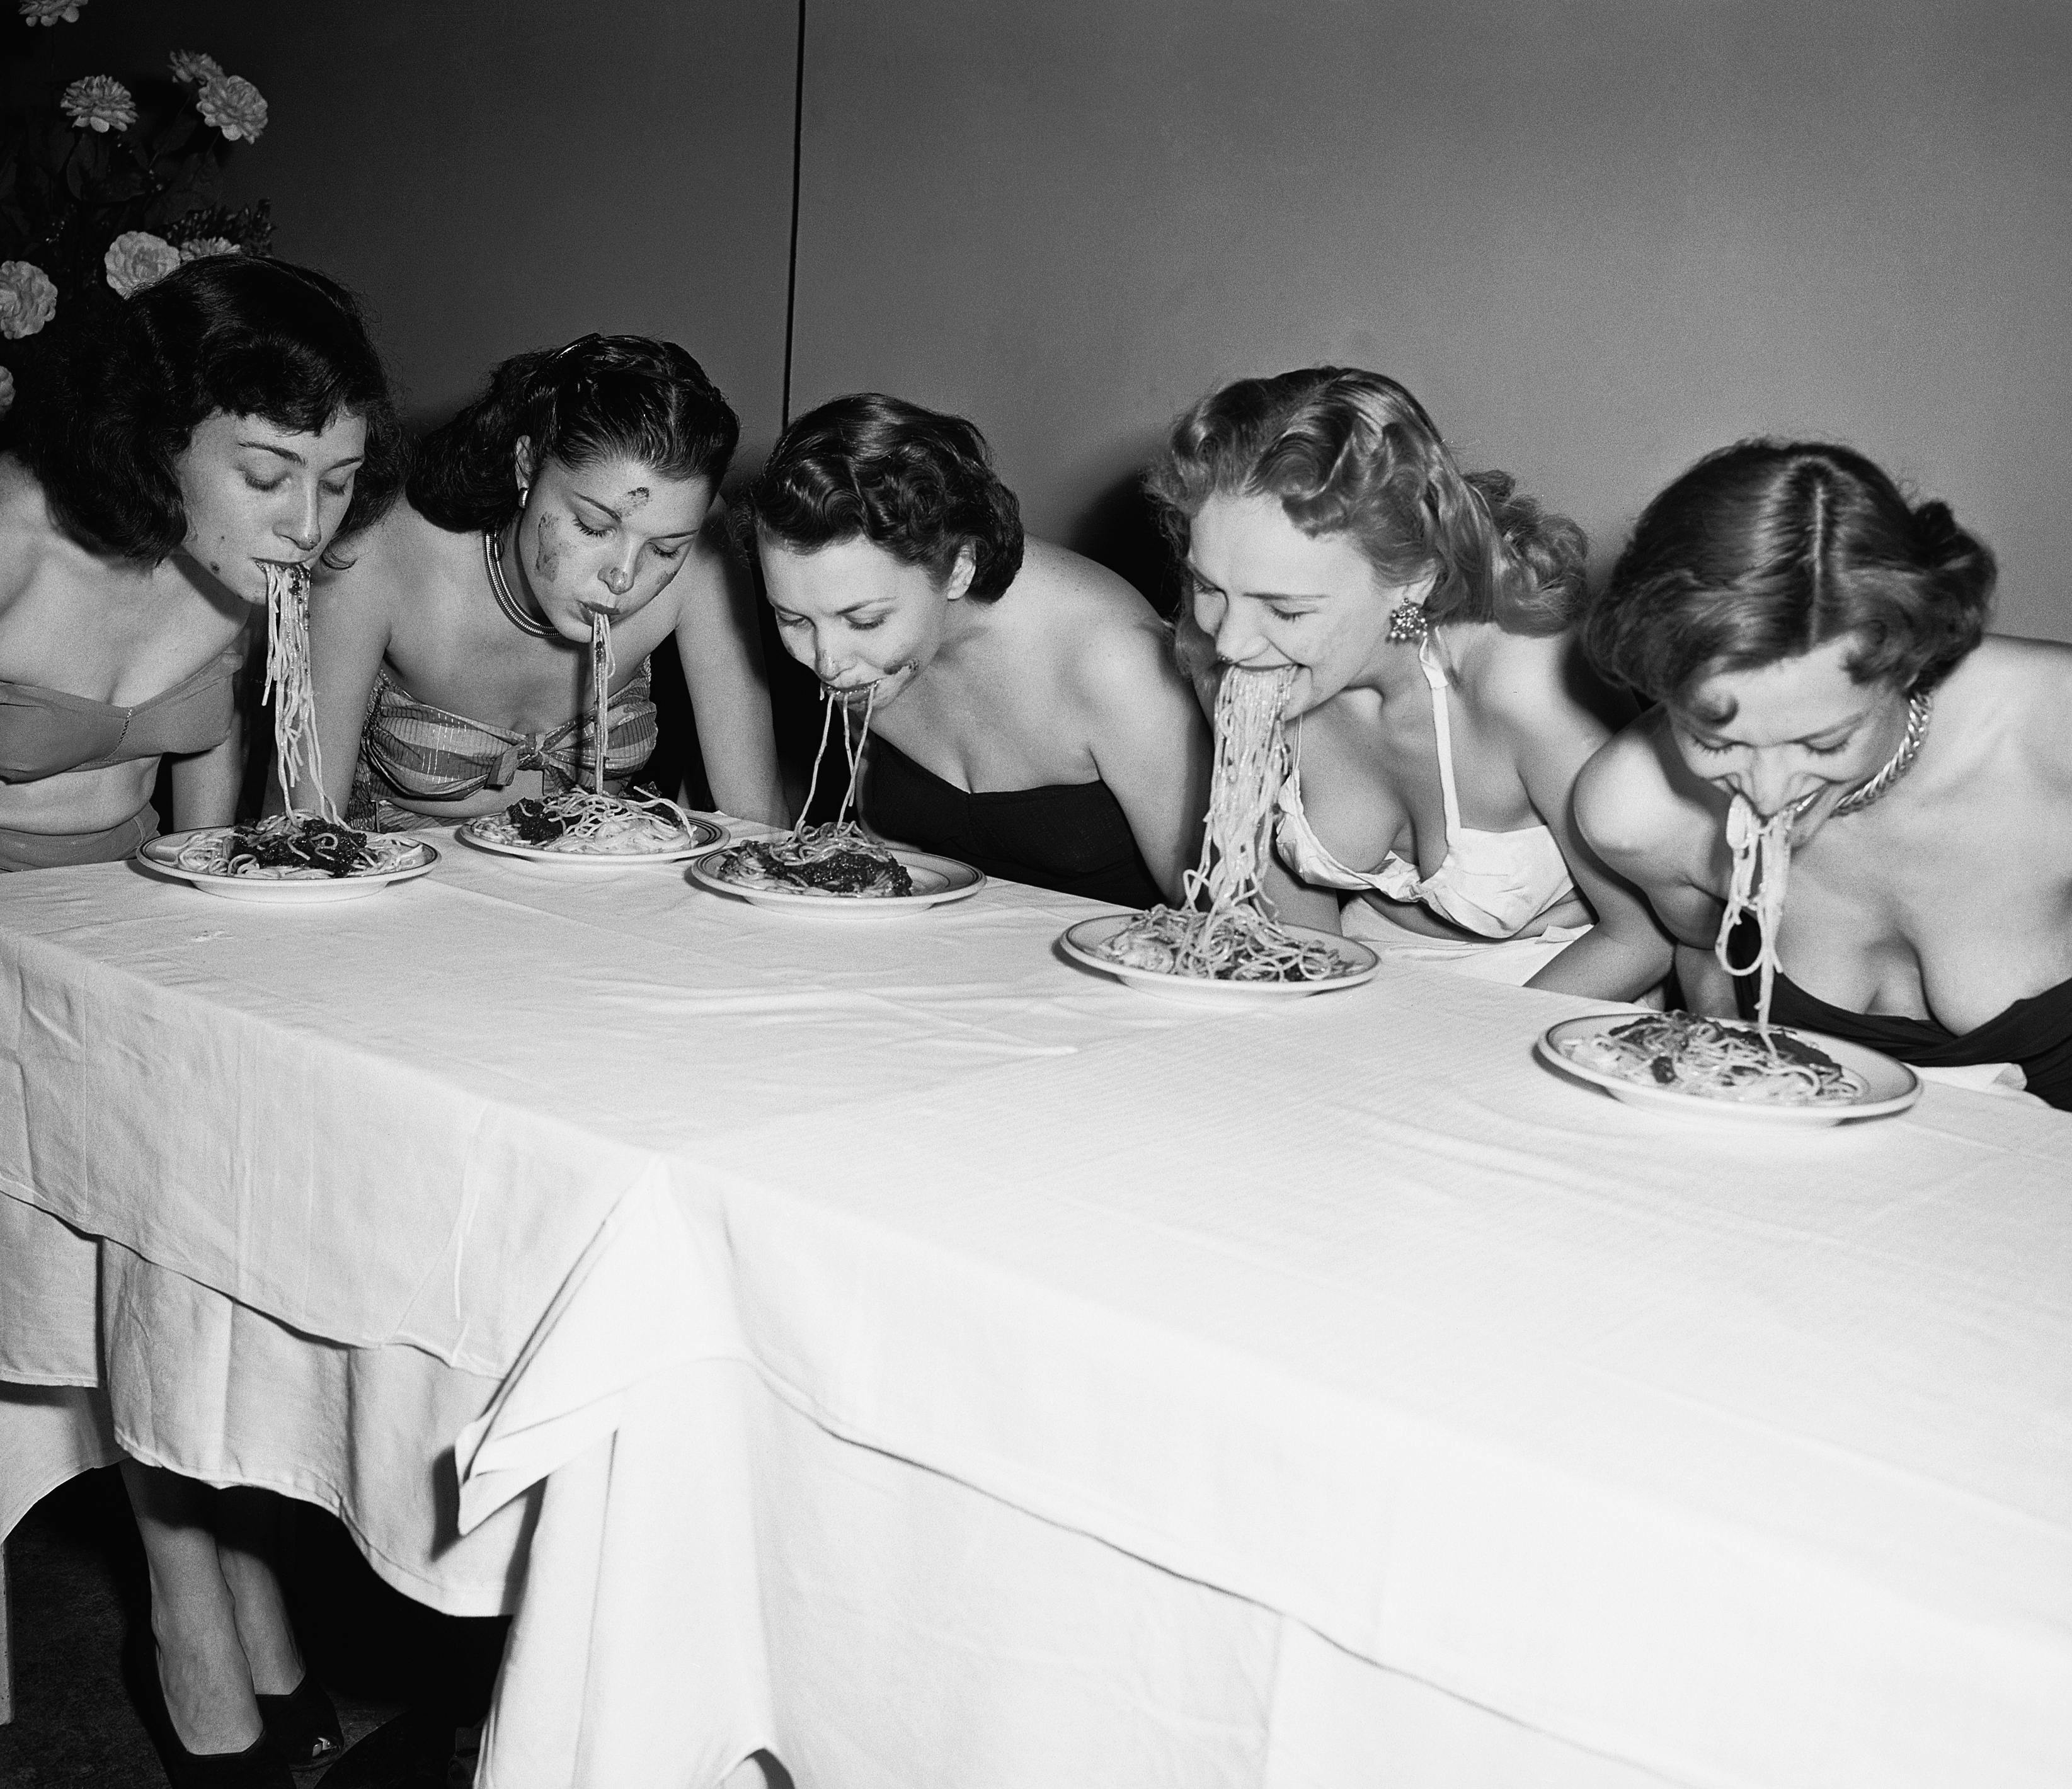 eating fun rivalry women head and shoulders portrait caucasian ethnicity dinner plate competitor flower arrangement spaghetti tablecloth american eating contest swimwear five people new york city table person human